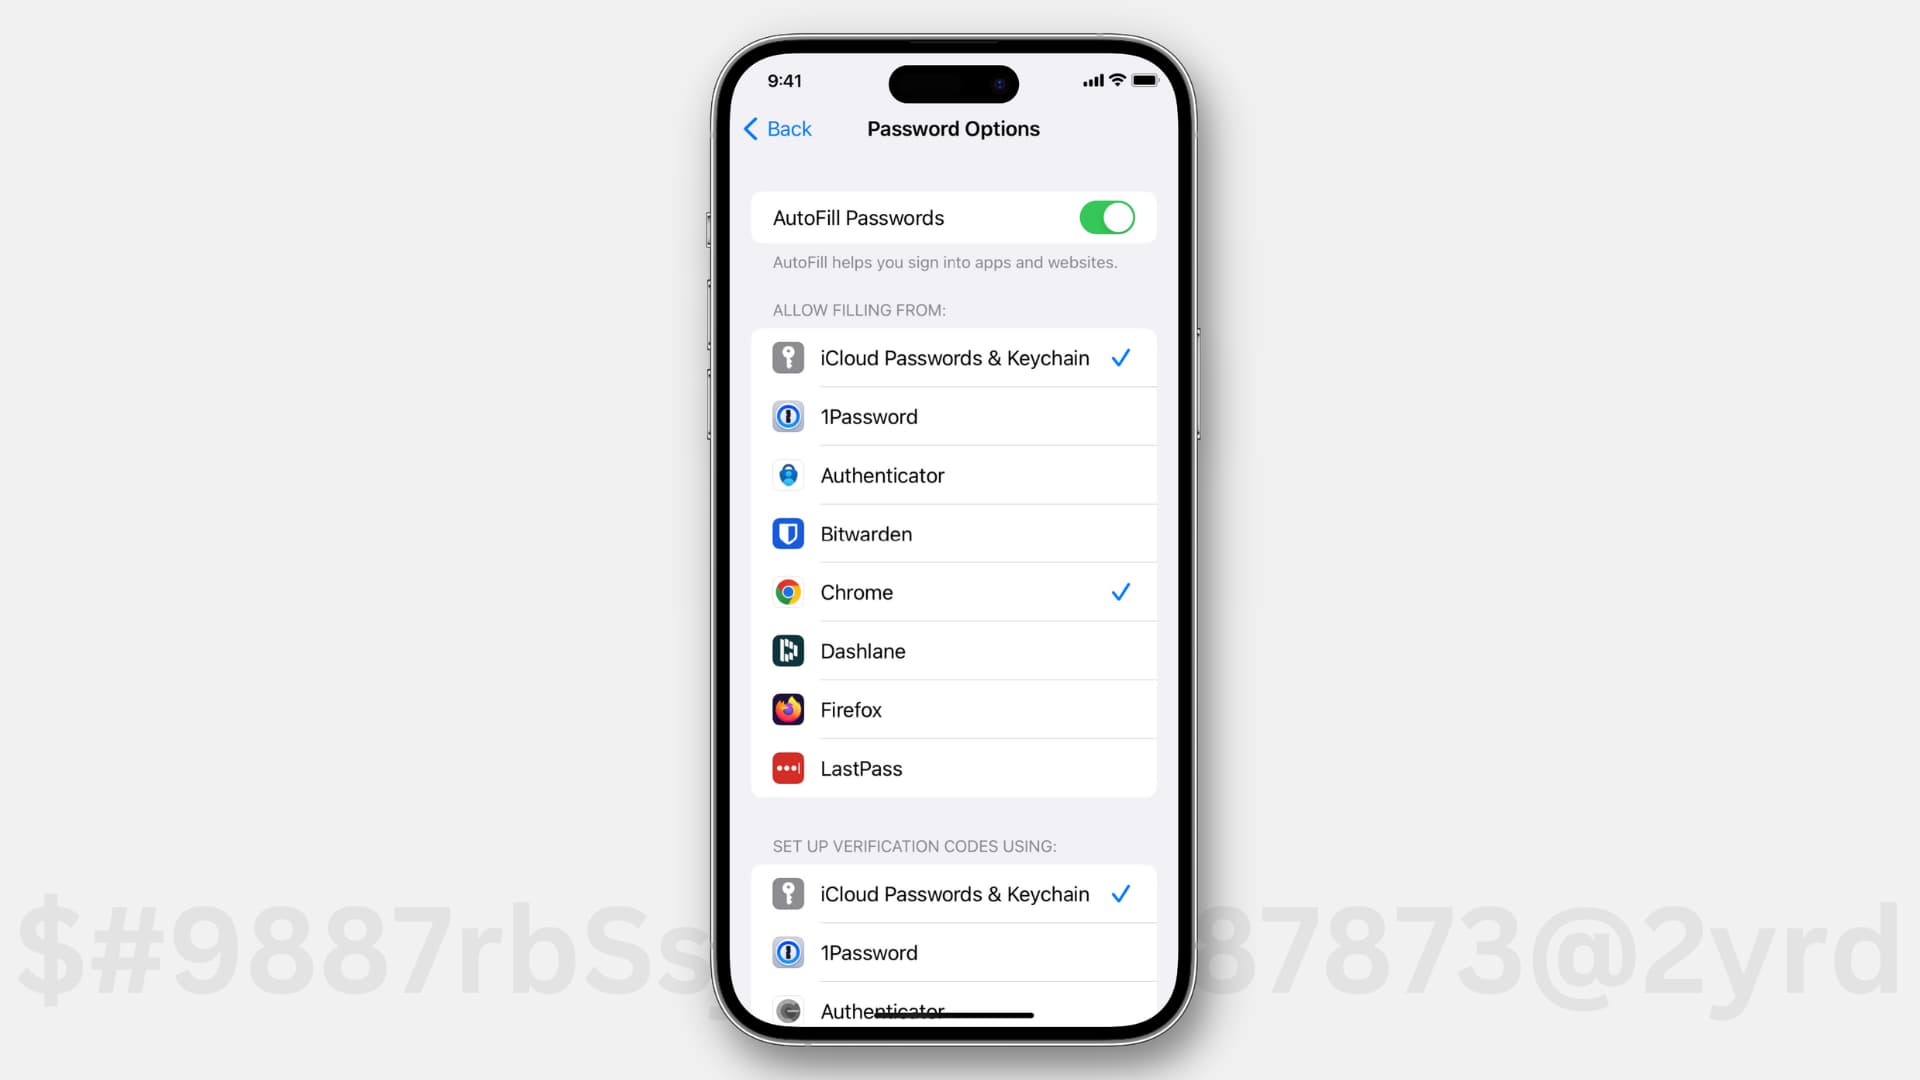 Password autofill options on iPhone showing third-party password manager apps